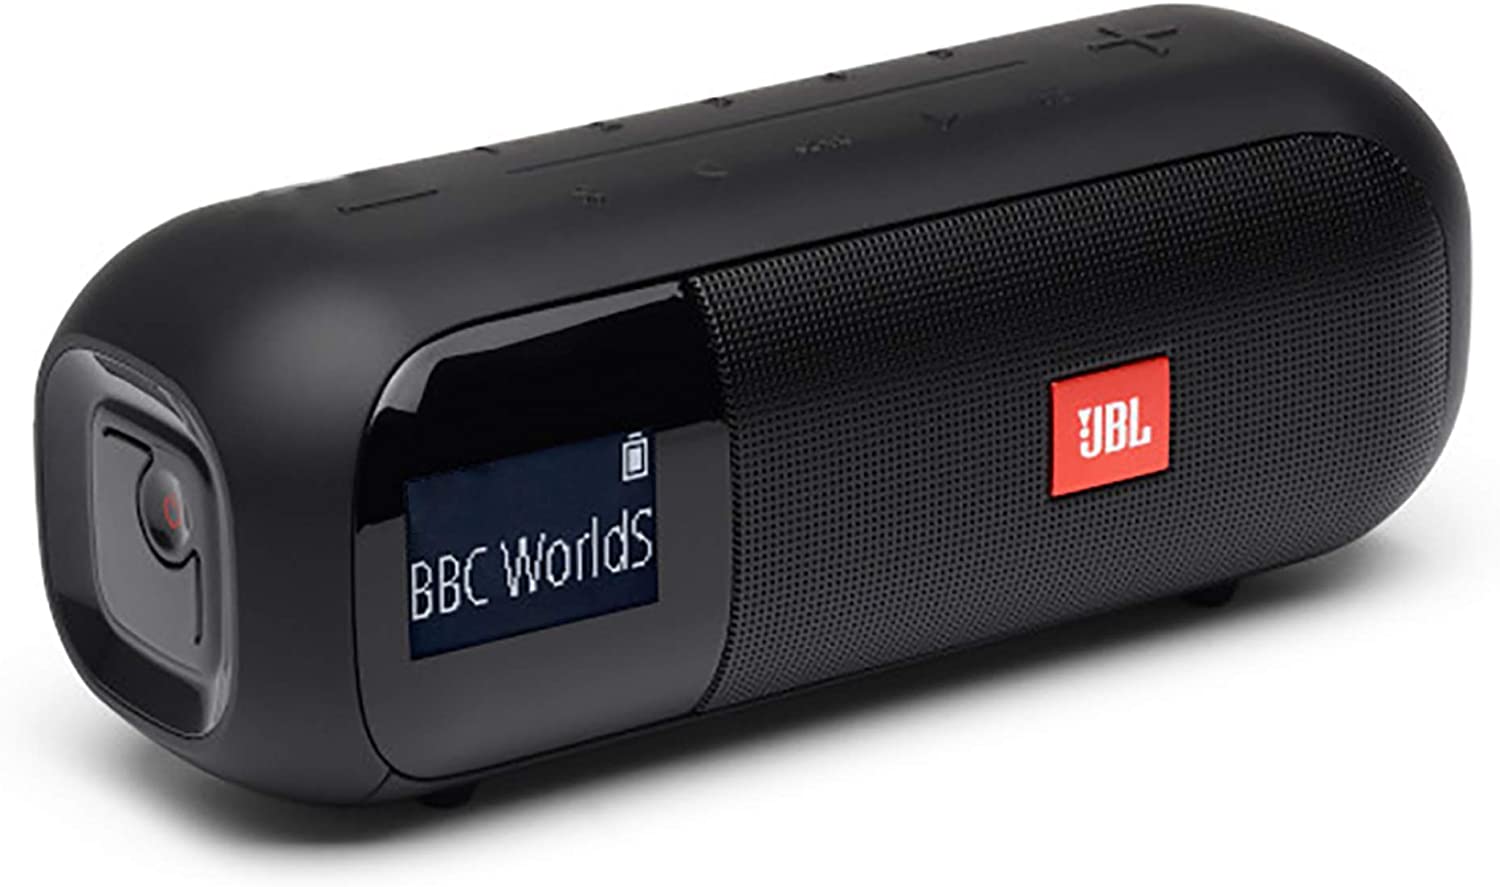 JBL Tuner 2 new Bluetooth speaker with radio Unboxing and sound